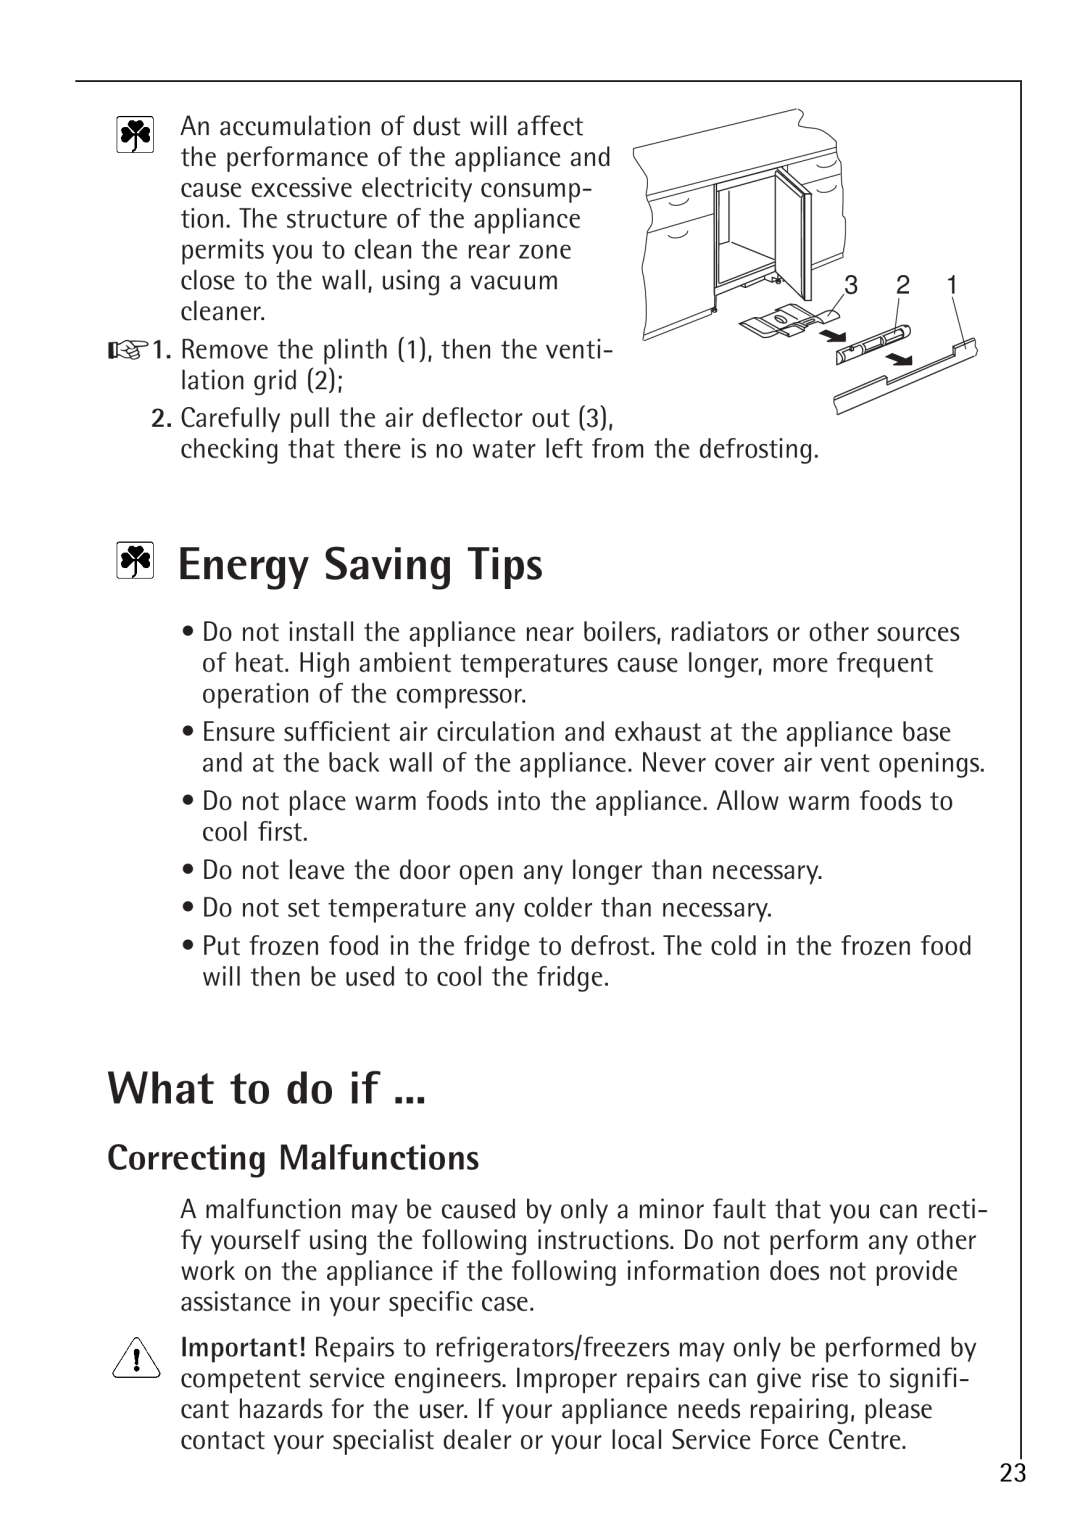 Electrolux 86000 i installation instructions Energy Saving Tips, What to do if, Correcting Malfunctions 